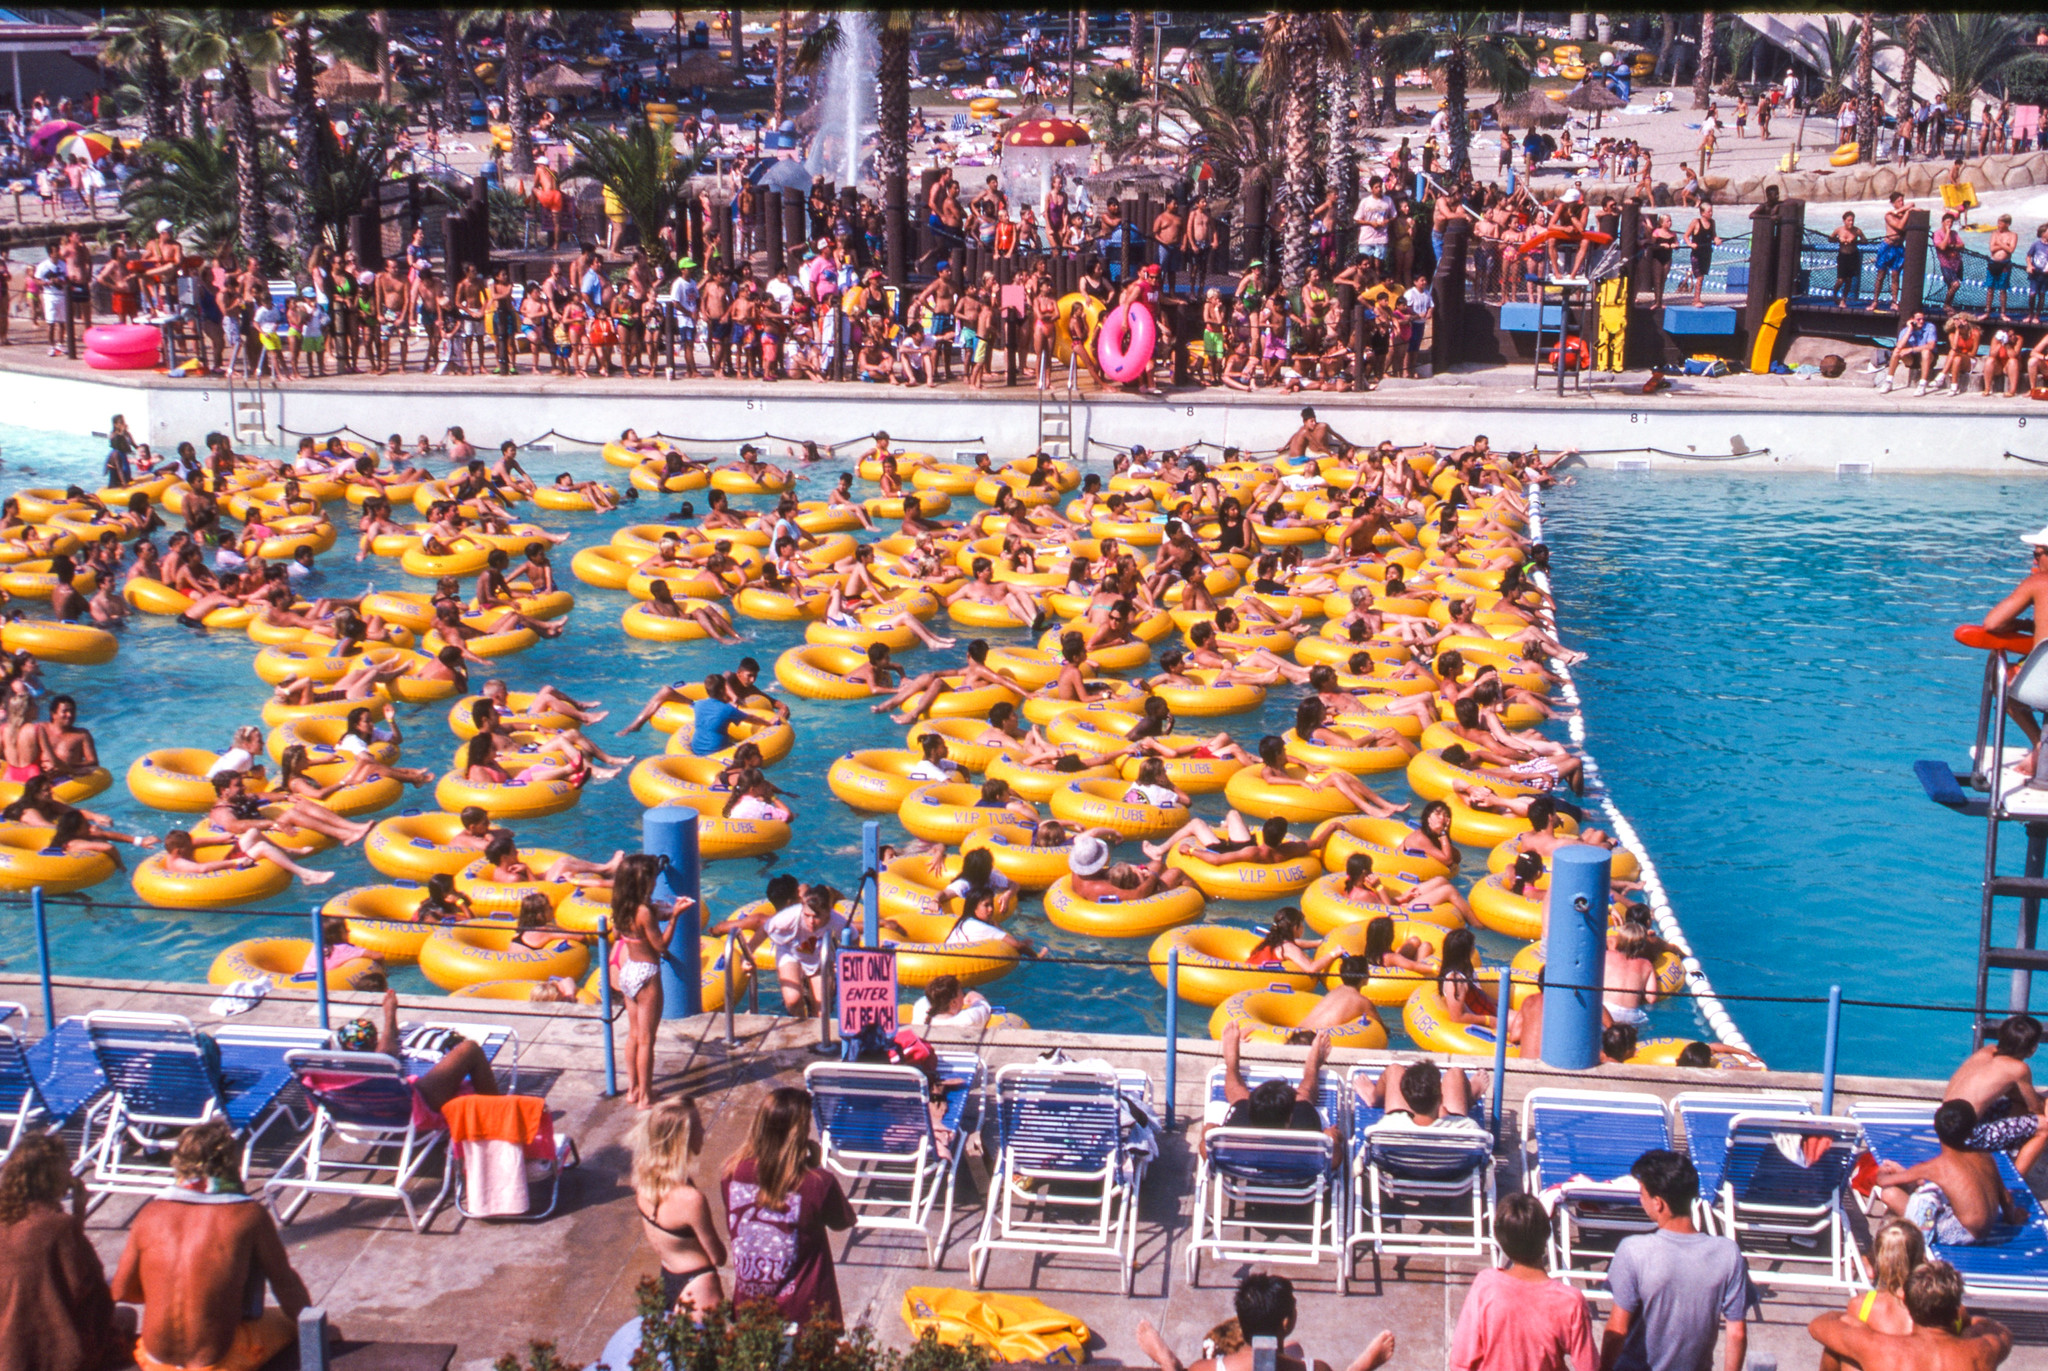 A wave pool at Raging Waters in San Dimas, one of the best water parks in the USA, filled with people in their swimming rings waiting for the wave